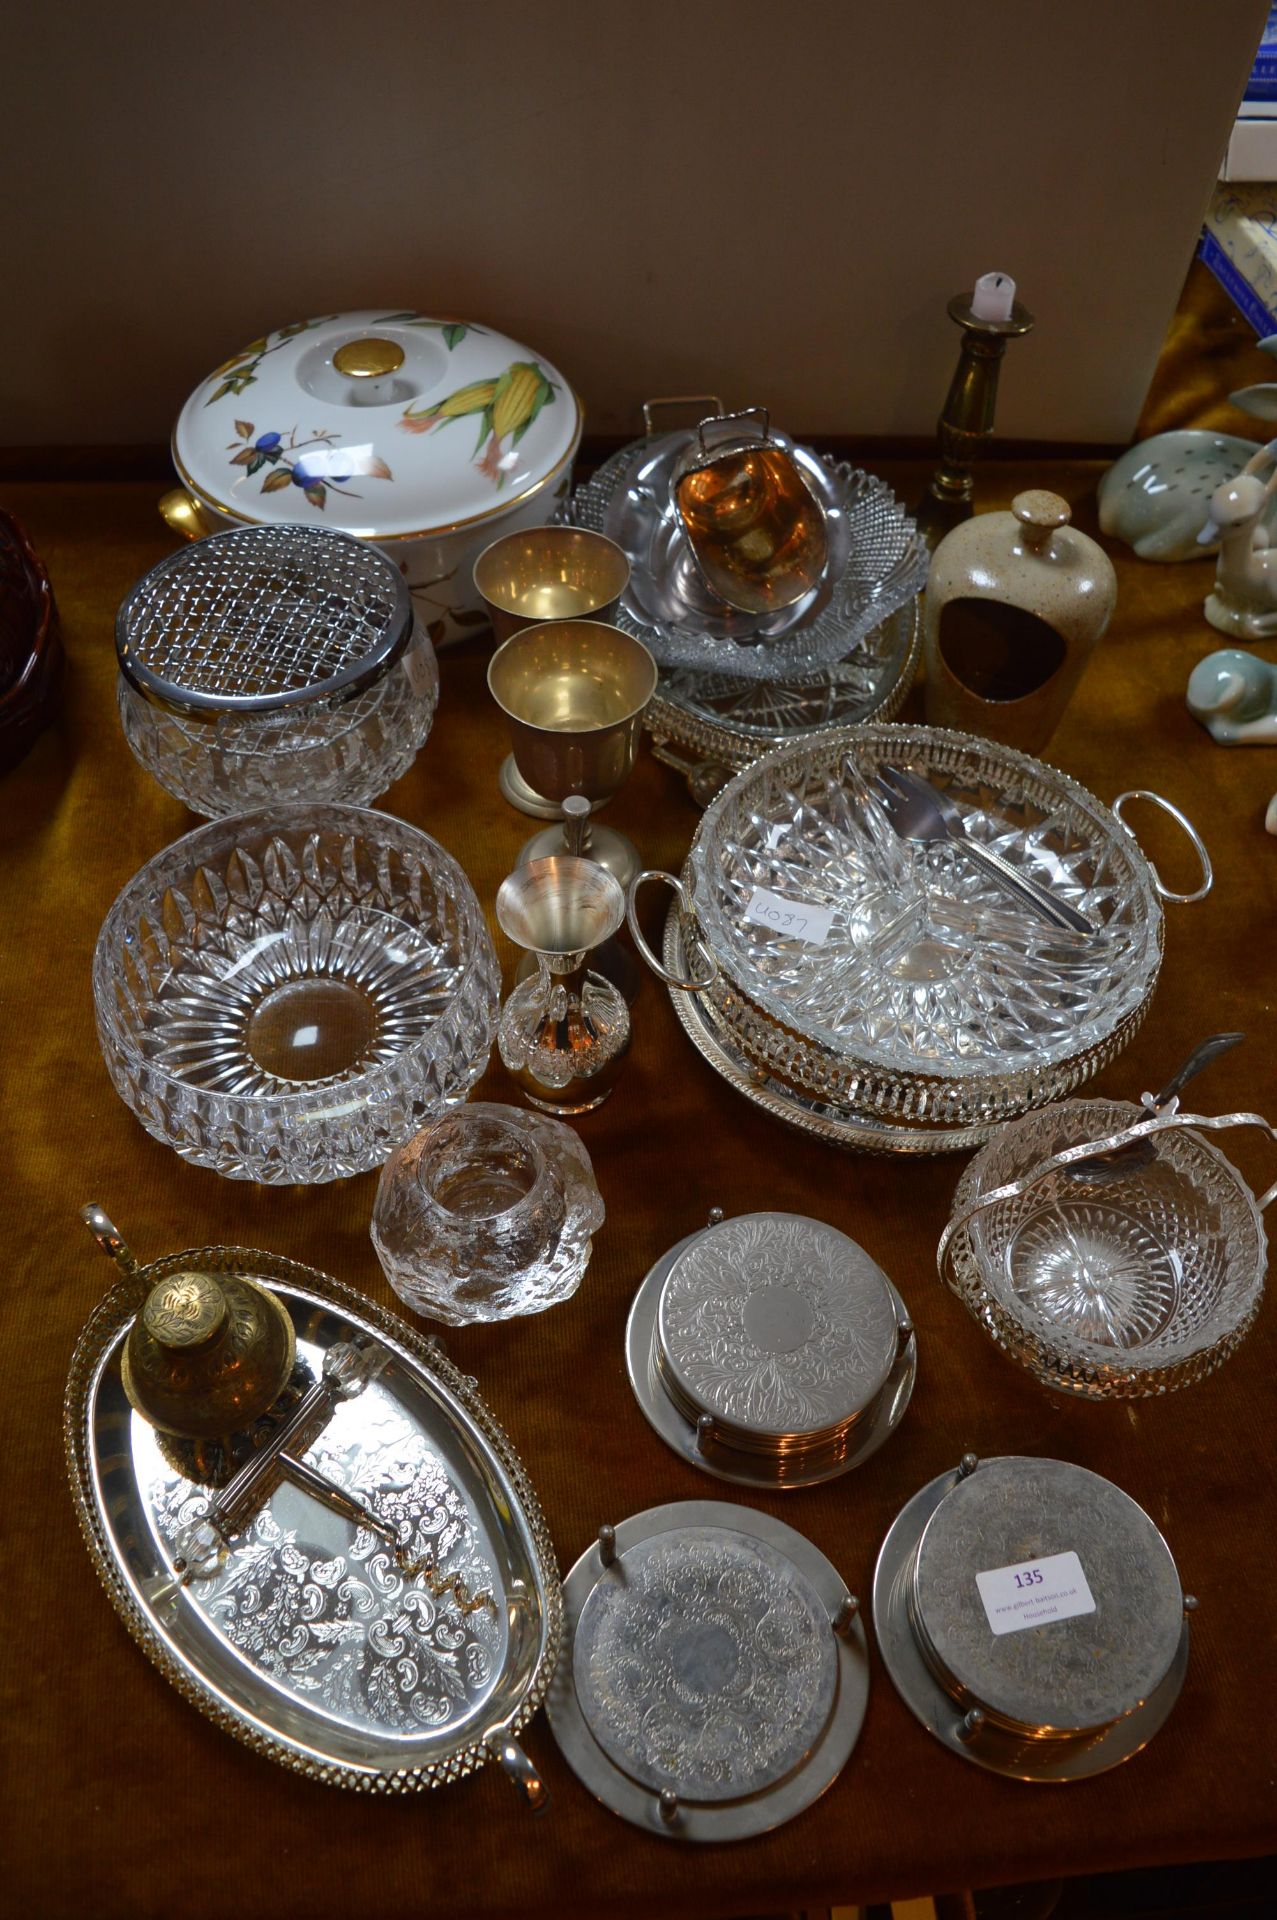 Glass Serving Bowls, Plated Dishes, Coaster and a